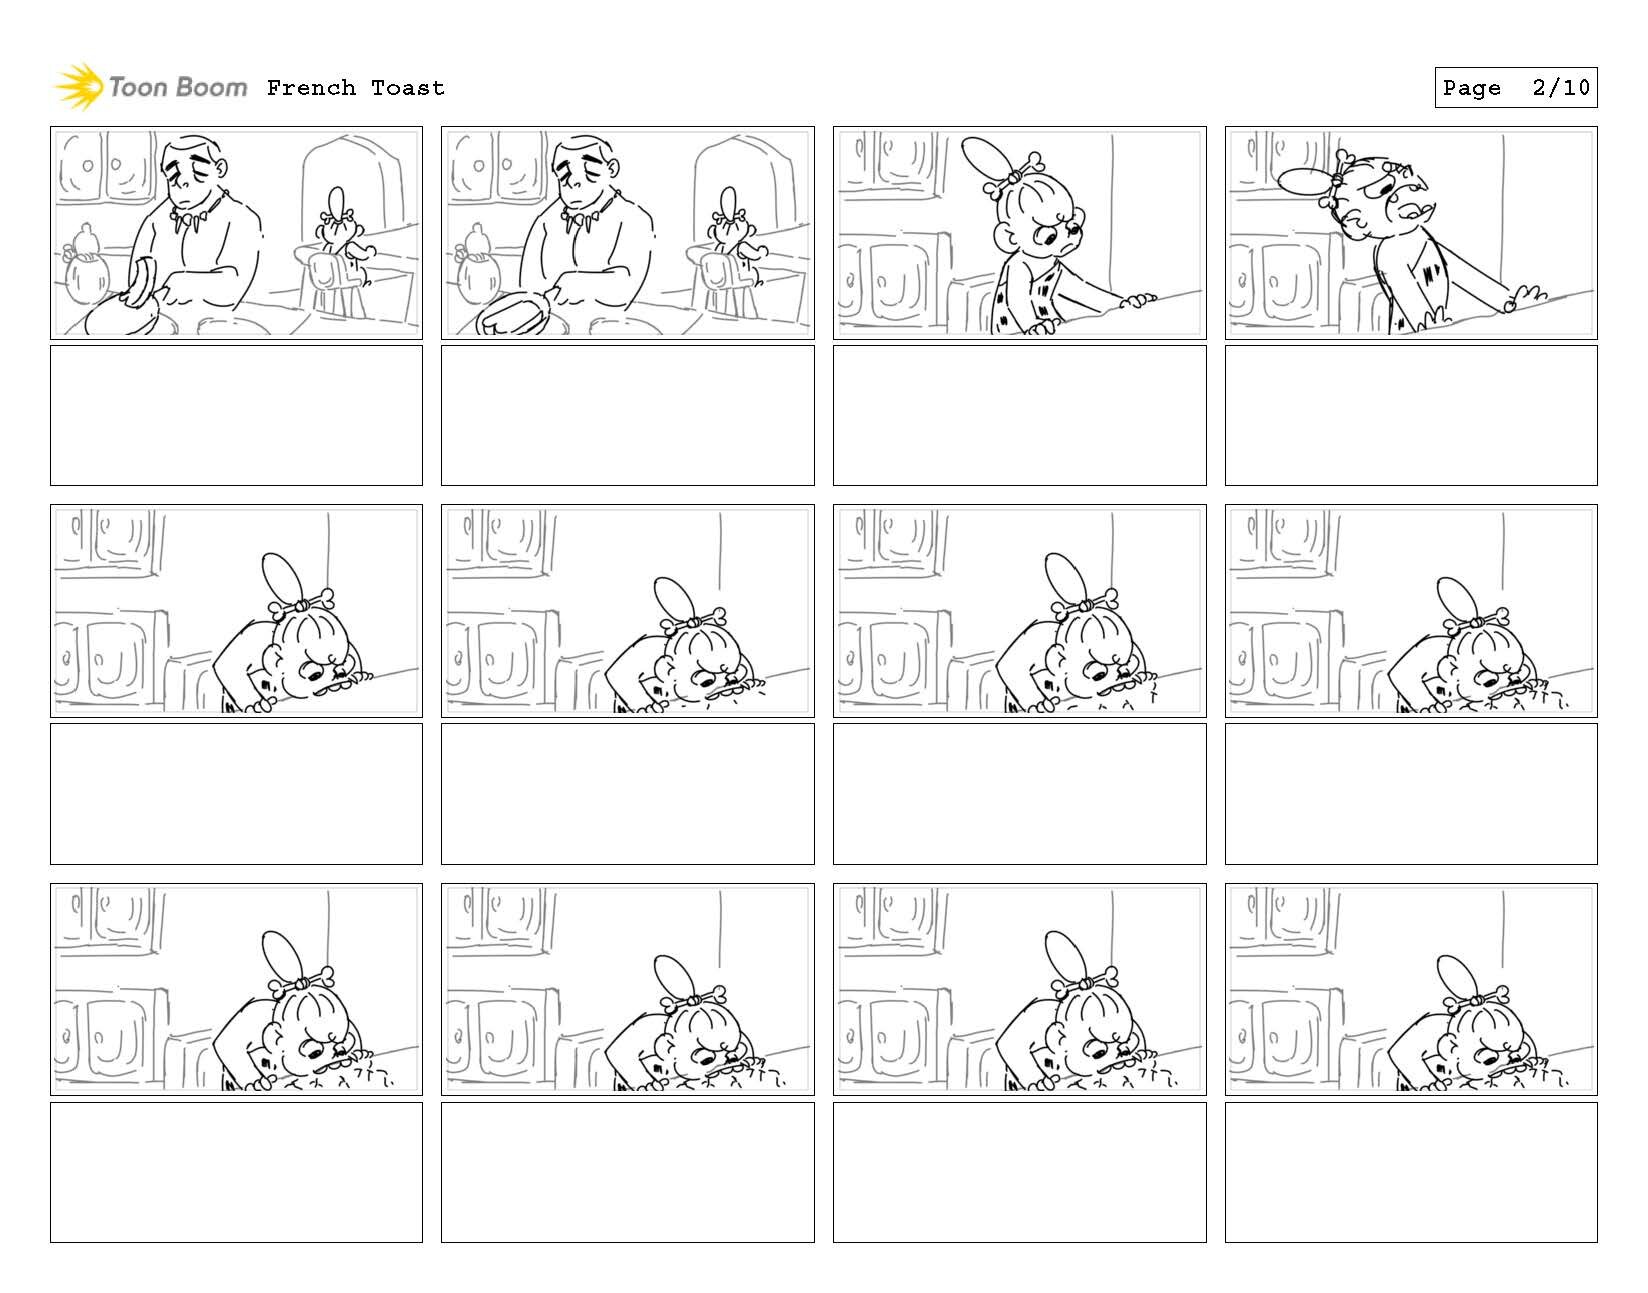 french toast mini thumbs_Page_03.jpg